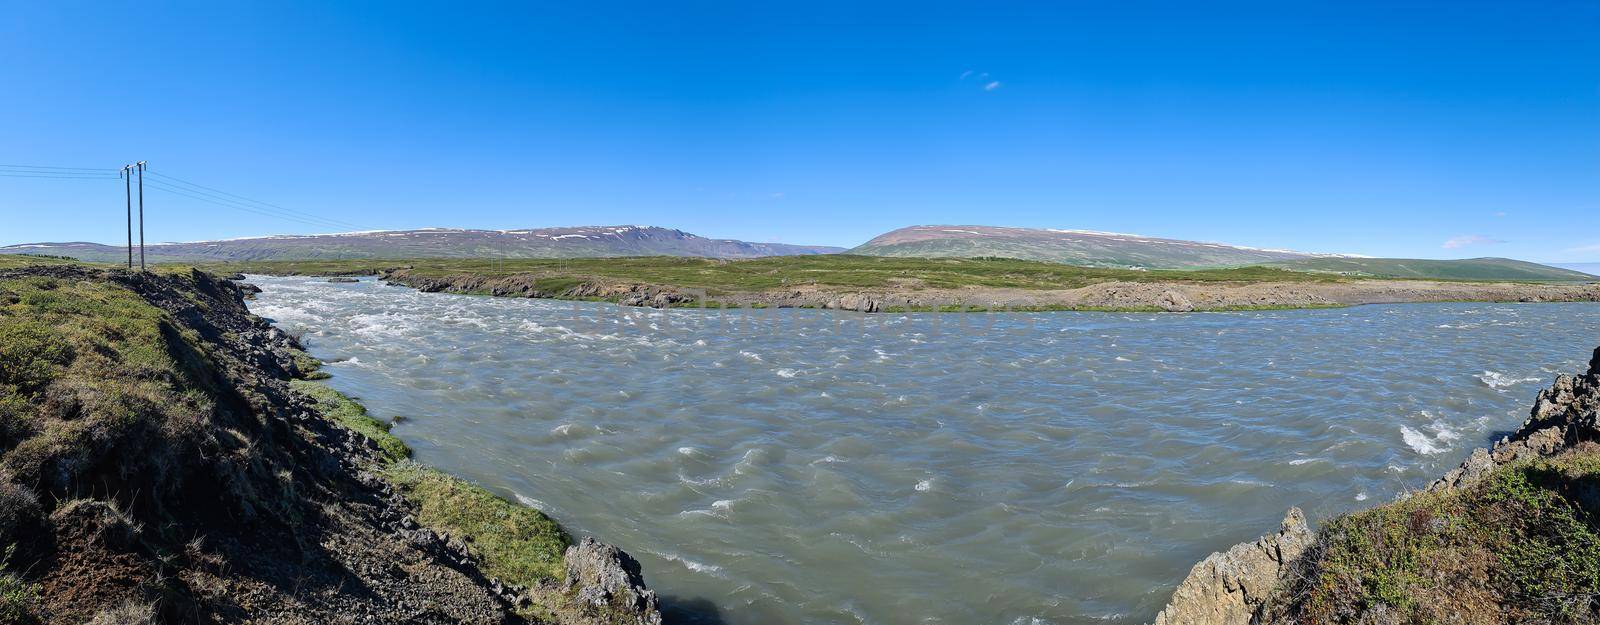 Fantastic landscape with flowing rivers and streams with rocks and grass in Iceland. by MP_foto71